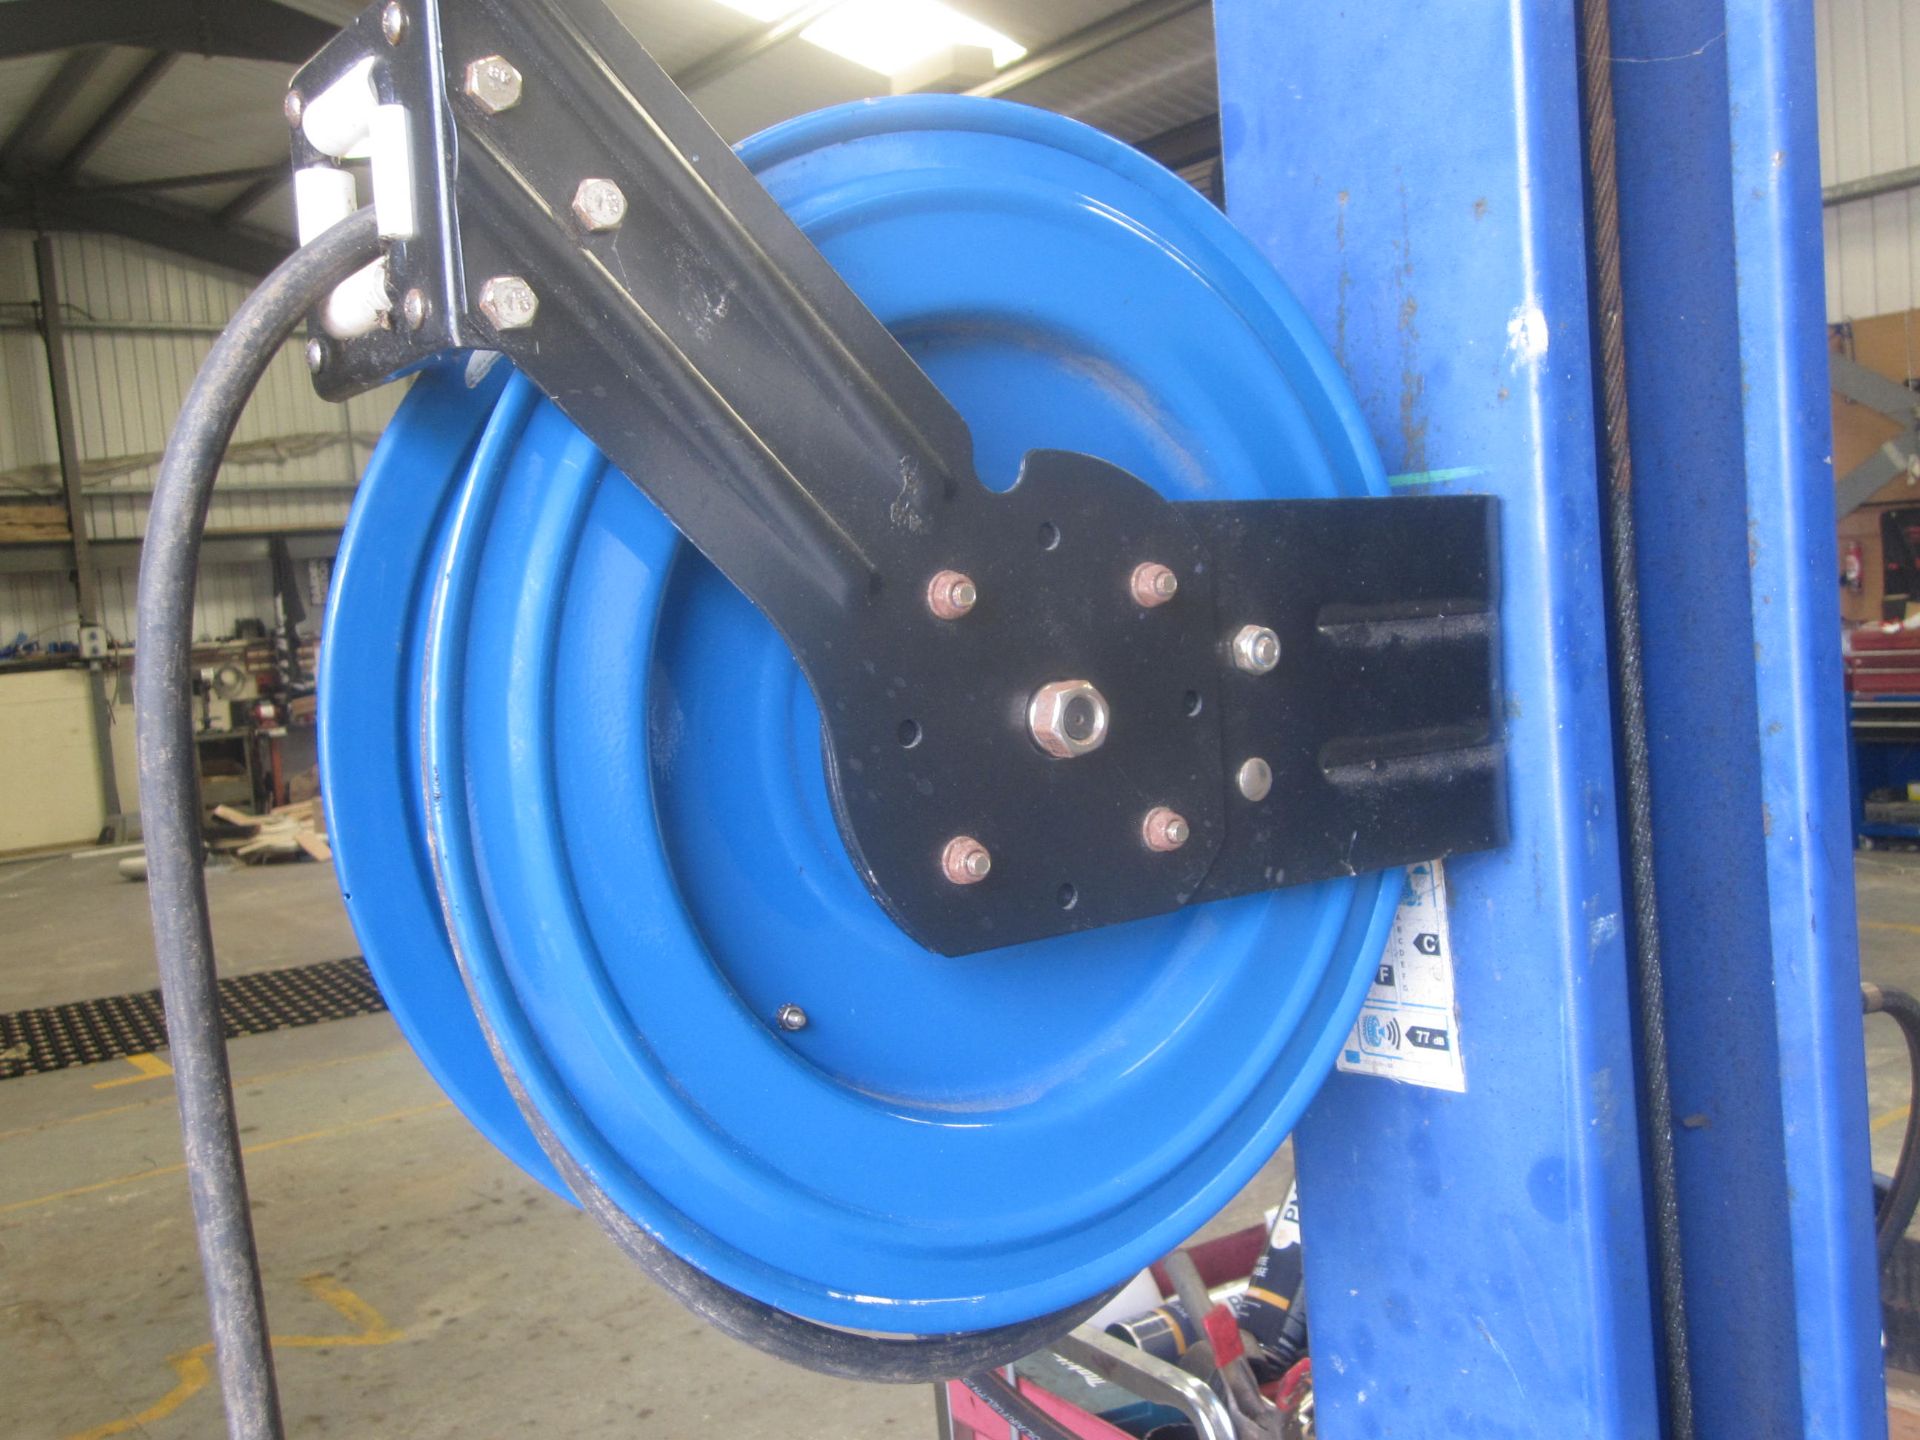 Wall mounted compressed air hose reel - Image 2 of 3